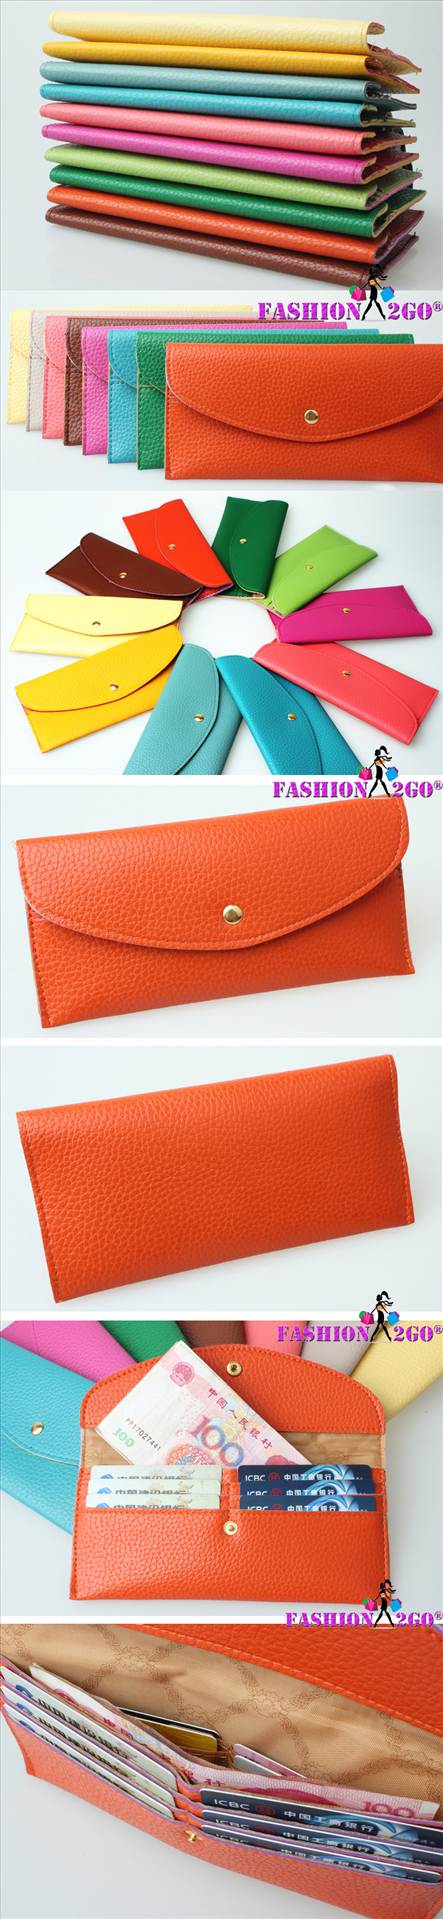 ENVELOPE POUCH2.jpg  by luce2339